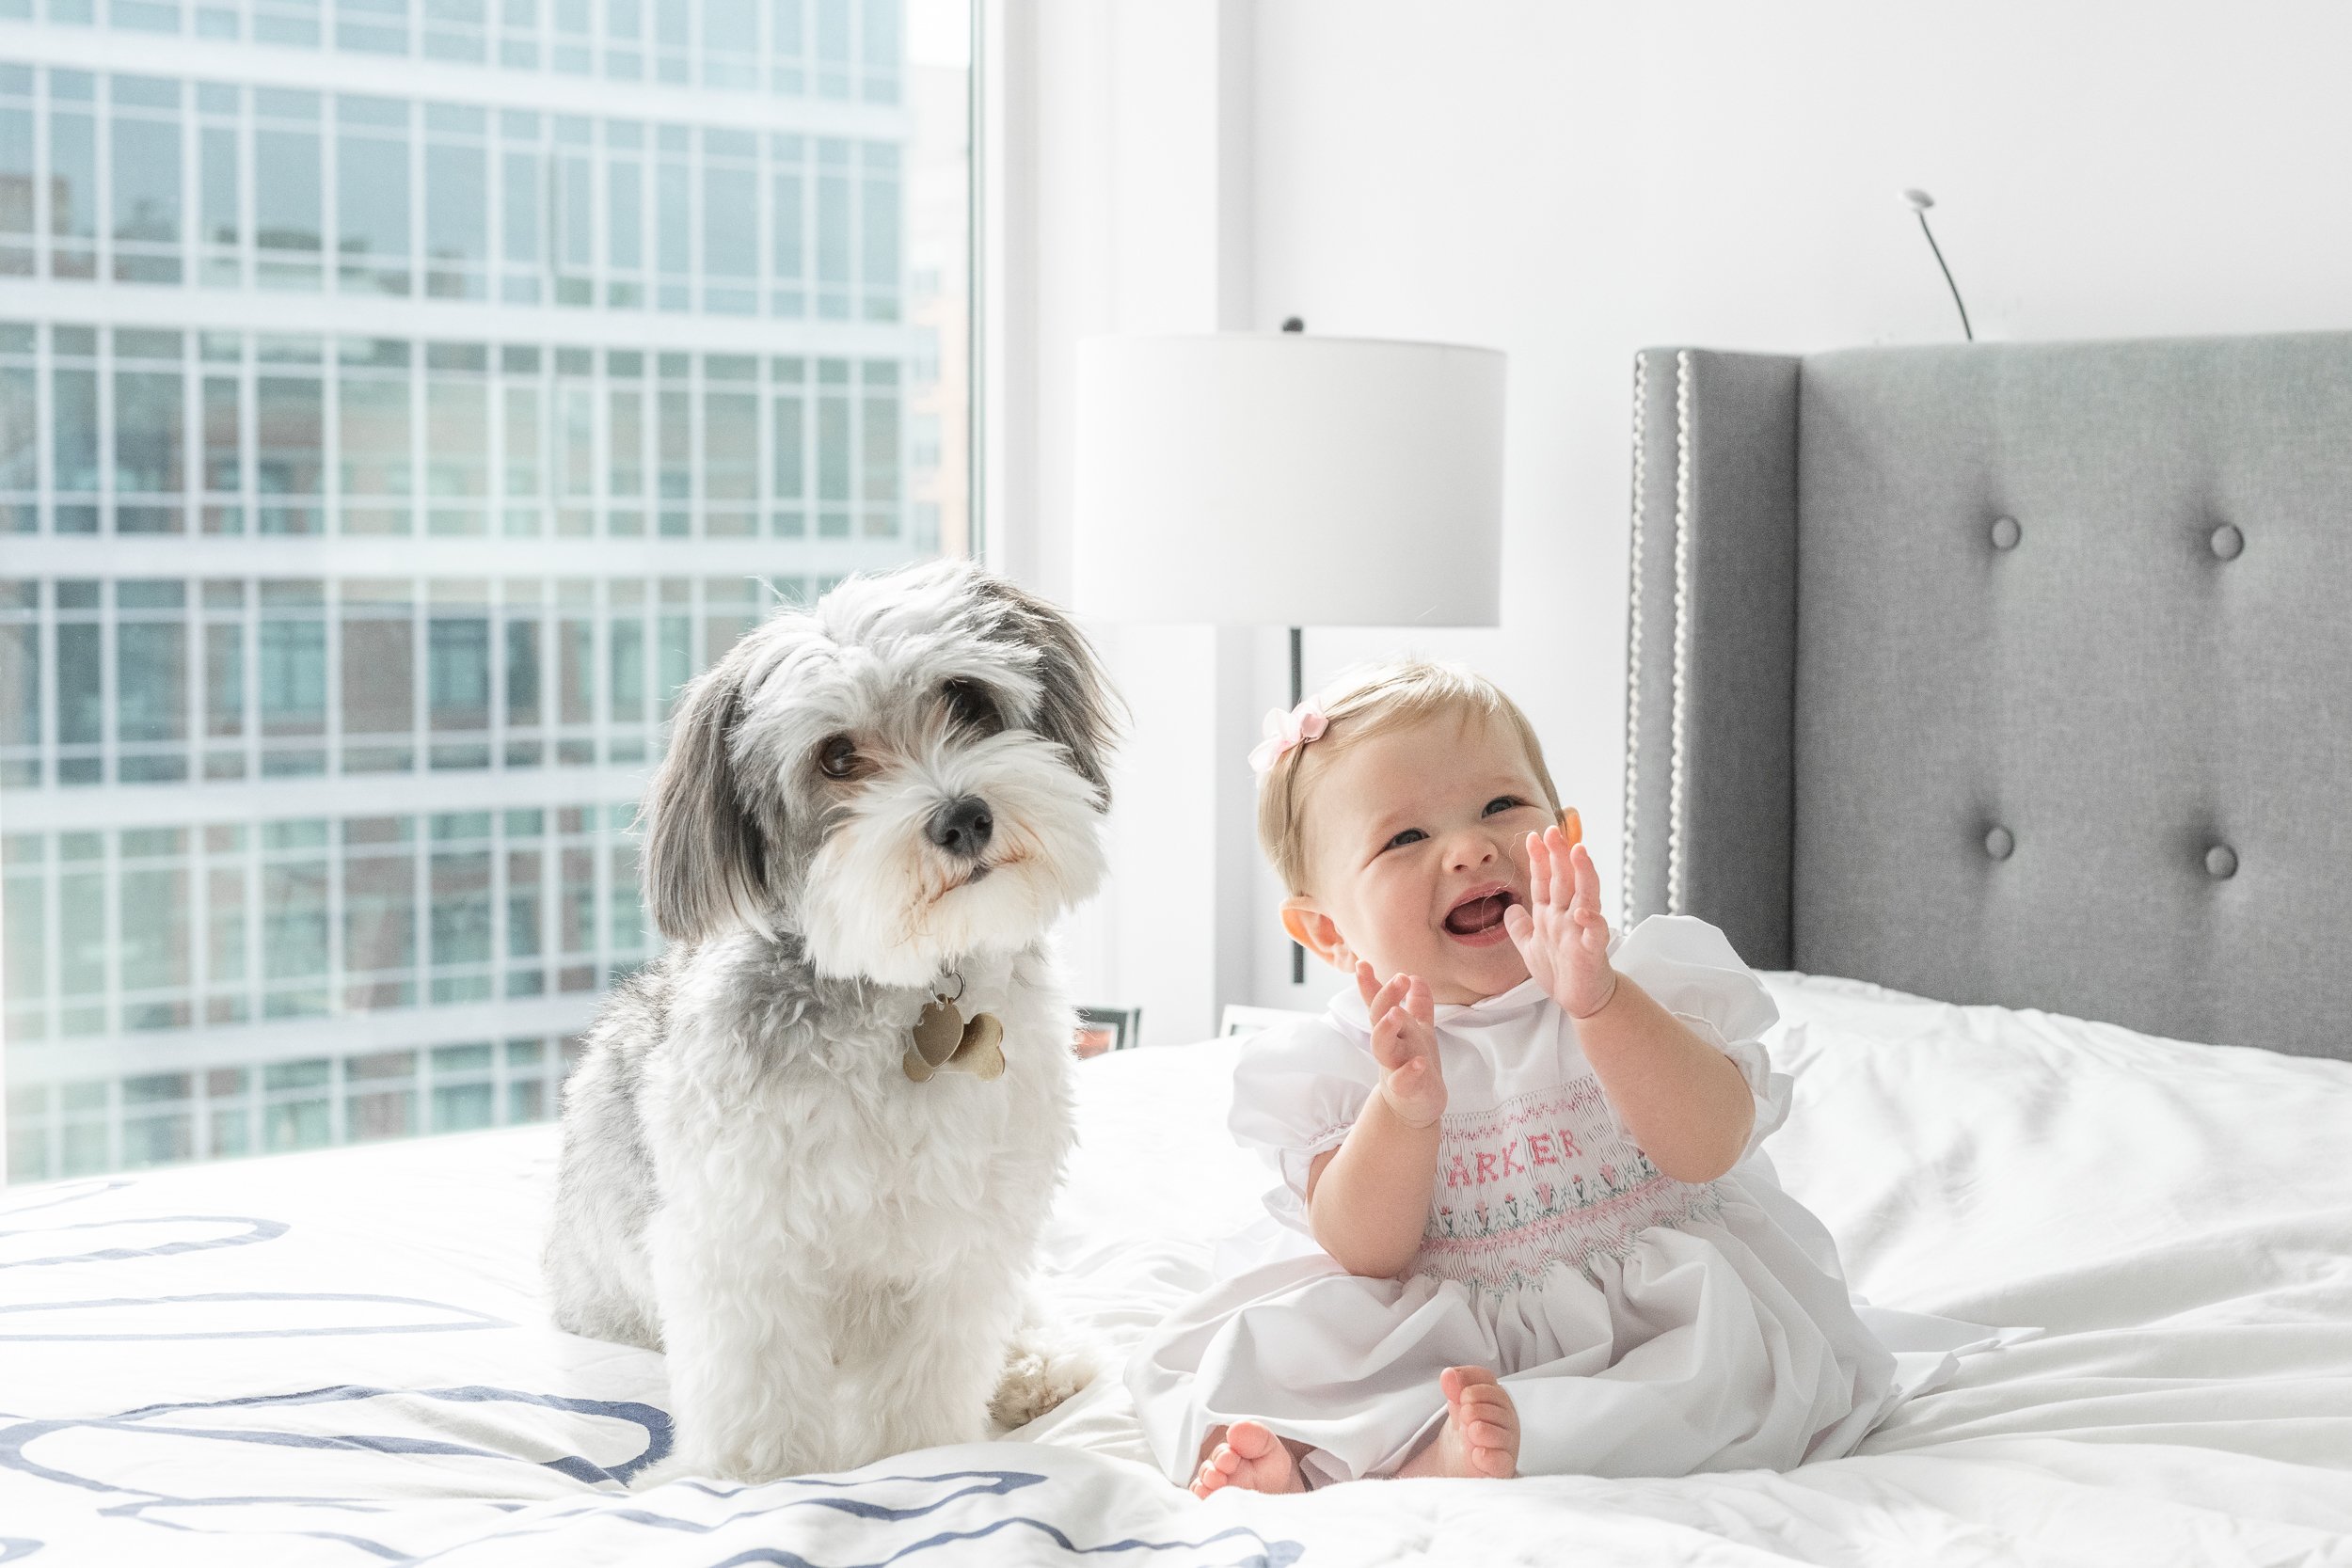  Little girl claps while sitting with her dog at a home session in Nicole Hawkins Photography. girl and her dog baby and dog on the bed in home #nicolehawkinsphotography #newjerseyphotographers #familyphotographer #6monthportraits #NJfamilyphotos 